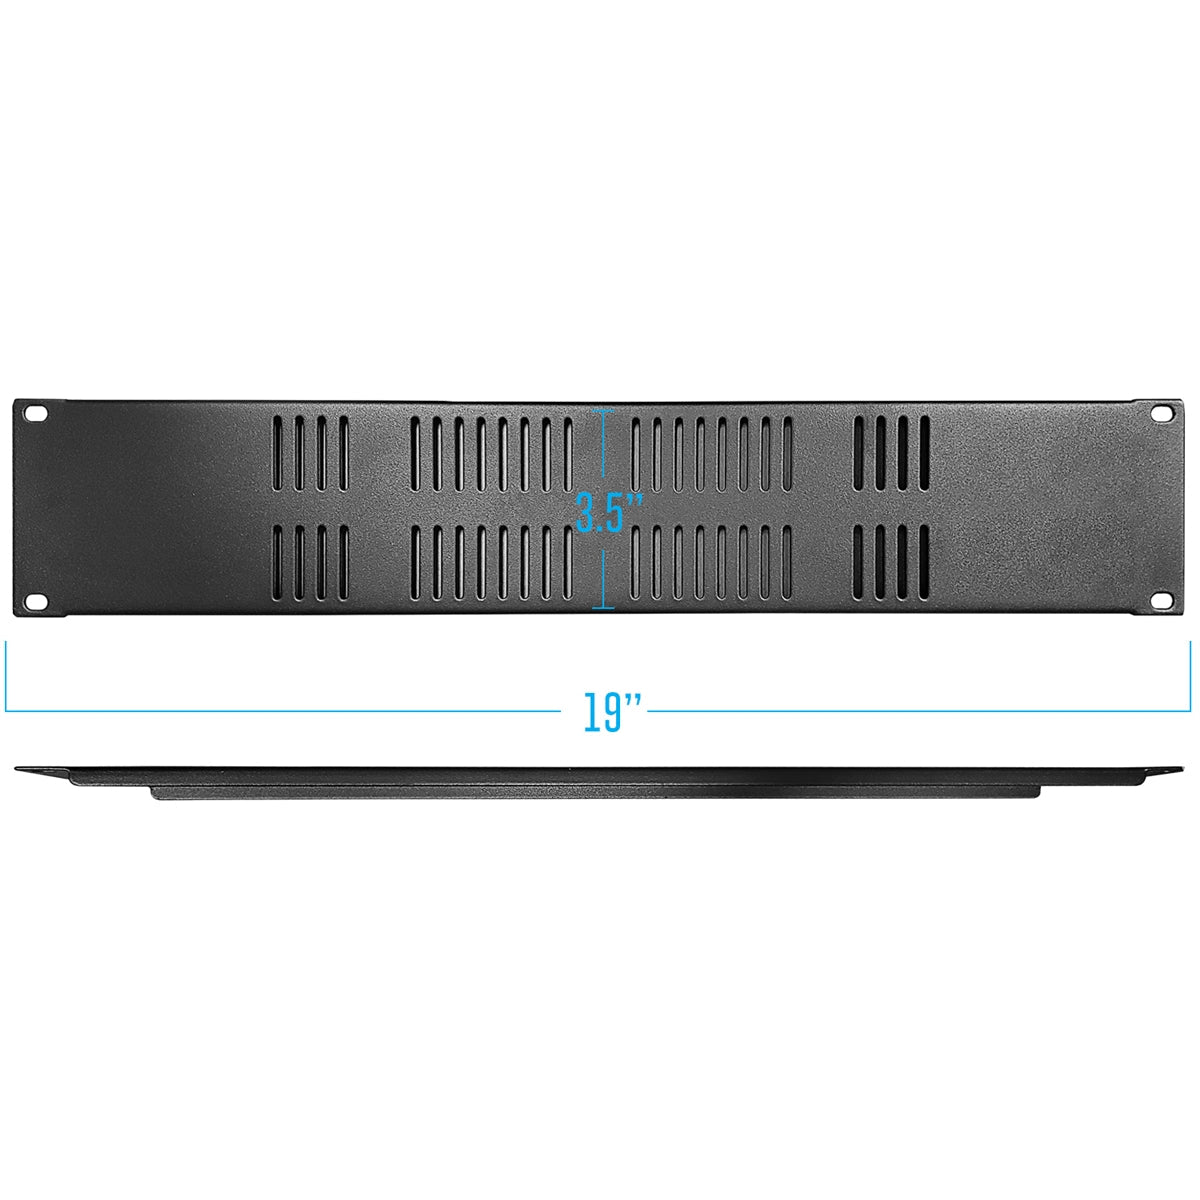 AxcessAbles RKVENTED2U 2U Vented Rack-Mount Panel for 19 inch Equipment and Server Racks. 3.75" Height x 19" Long